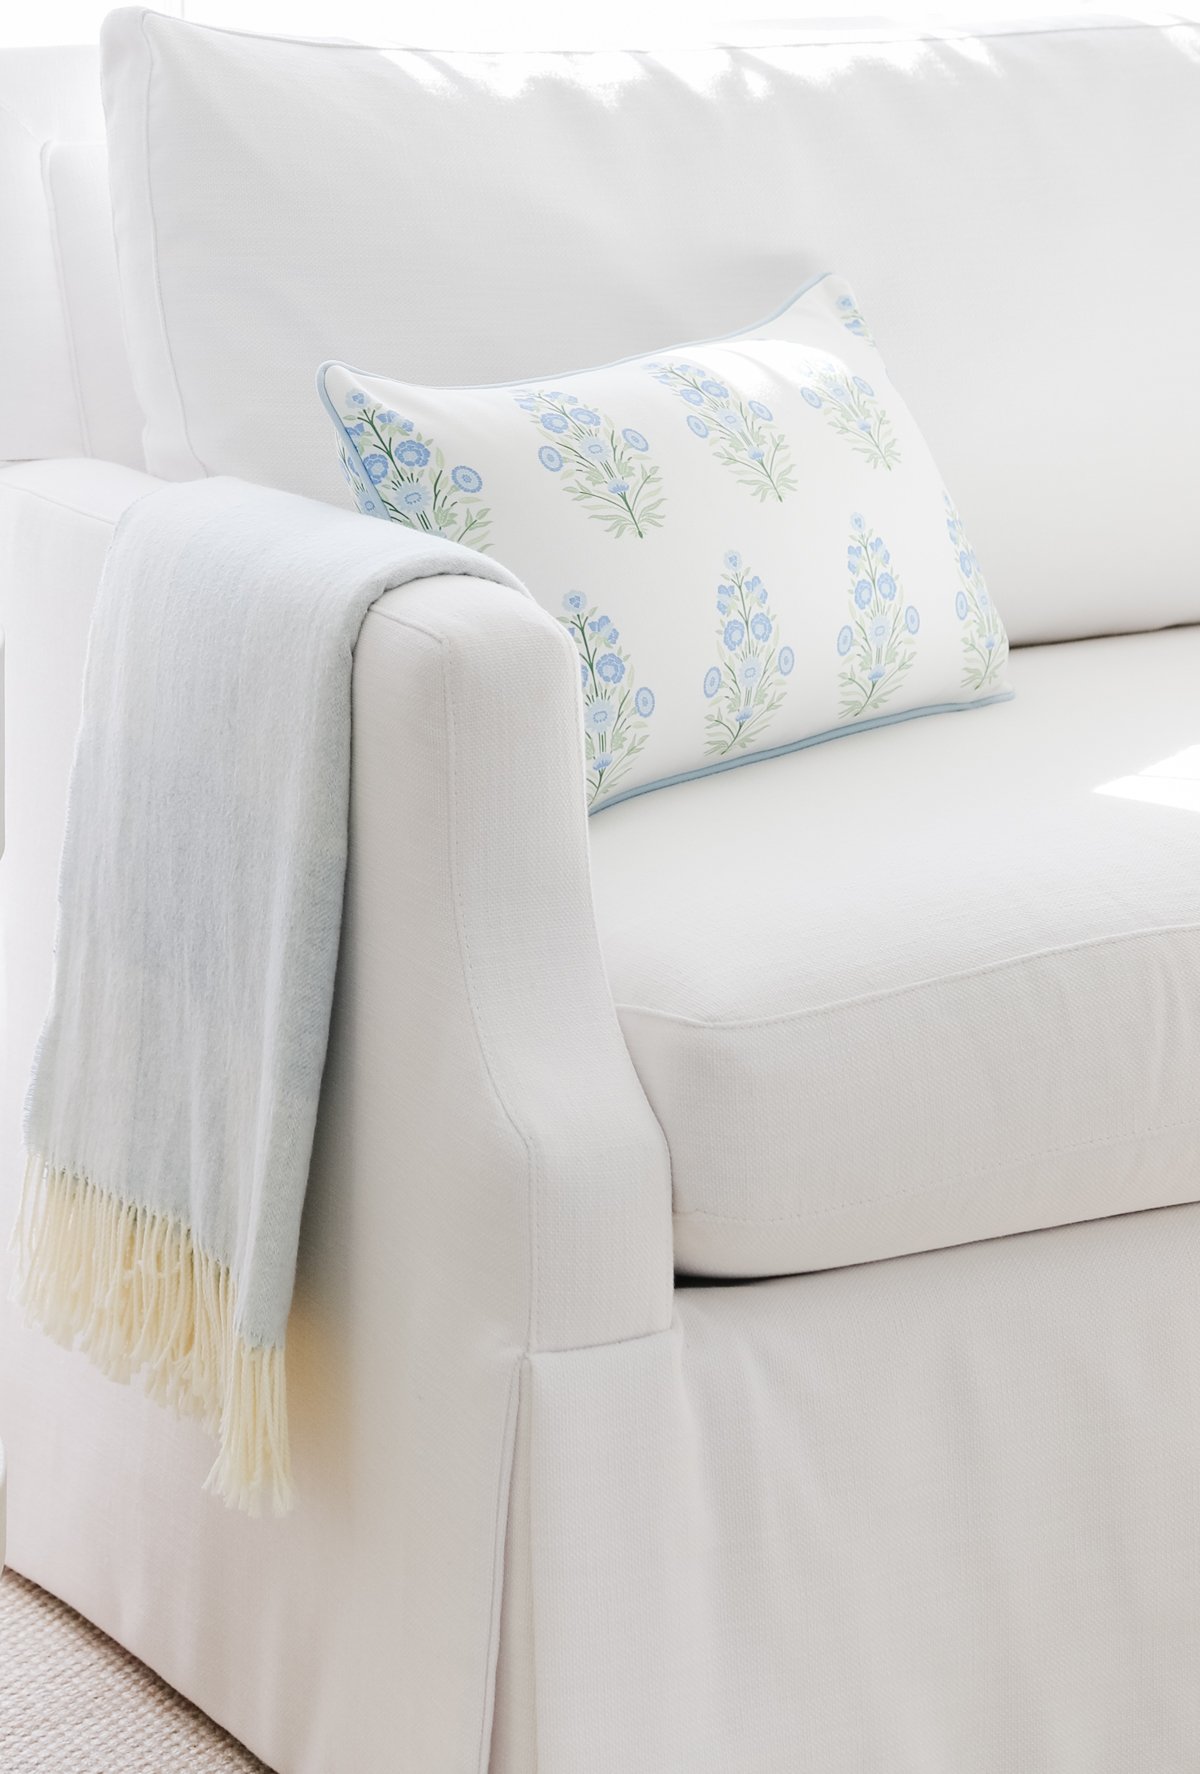 A white couch with a light blue blanket draped over the armrest and a white pillow decorated with a blue floral pattern placed on the seat.